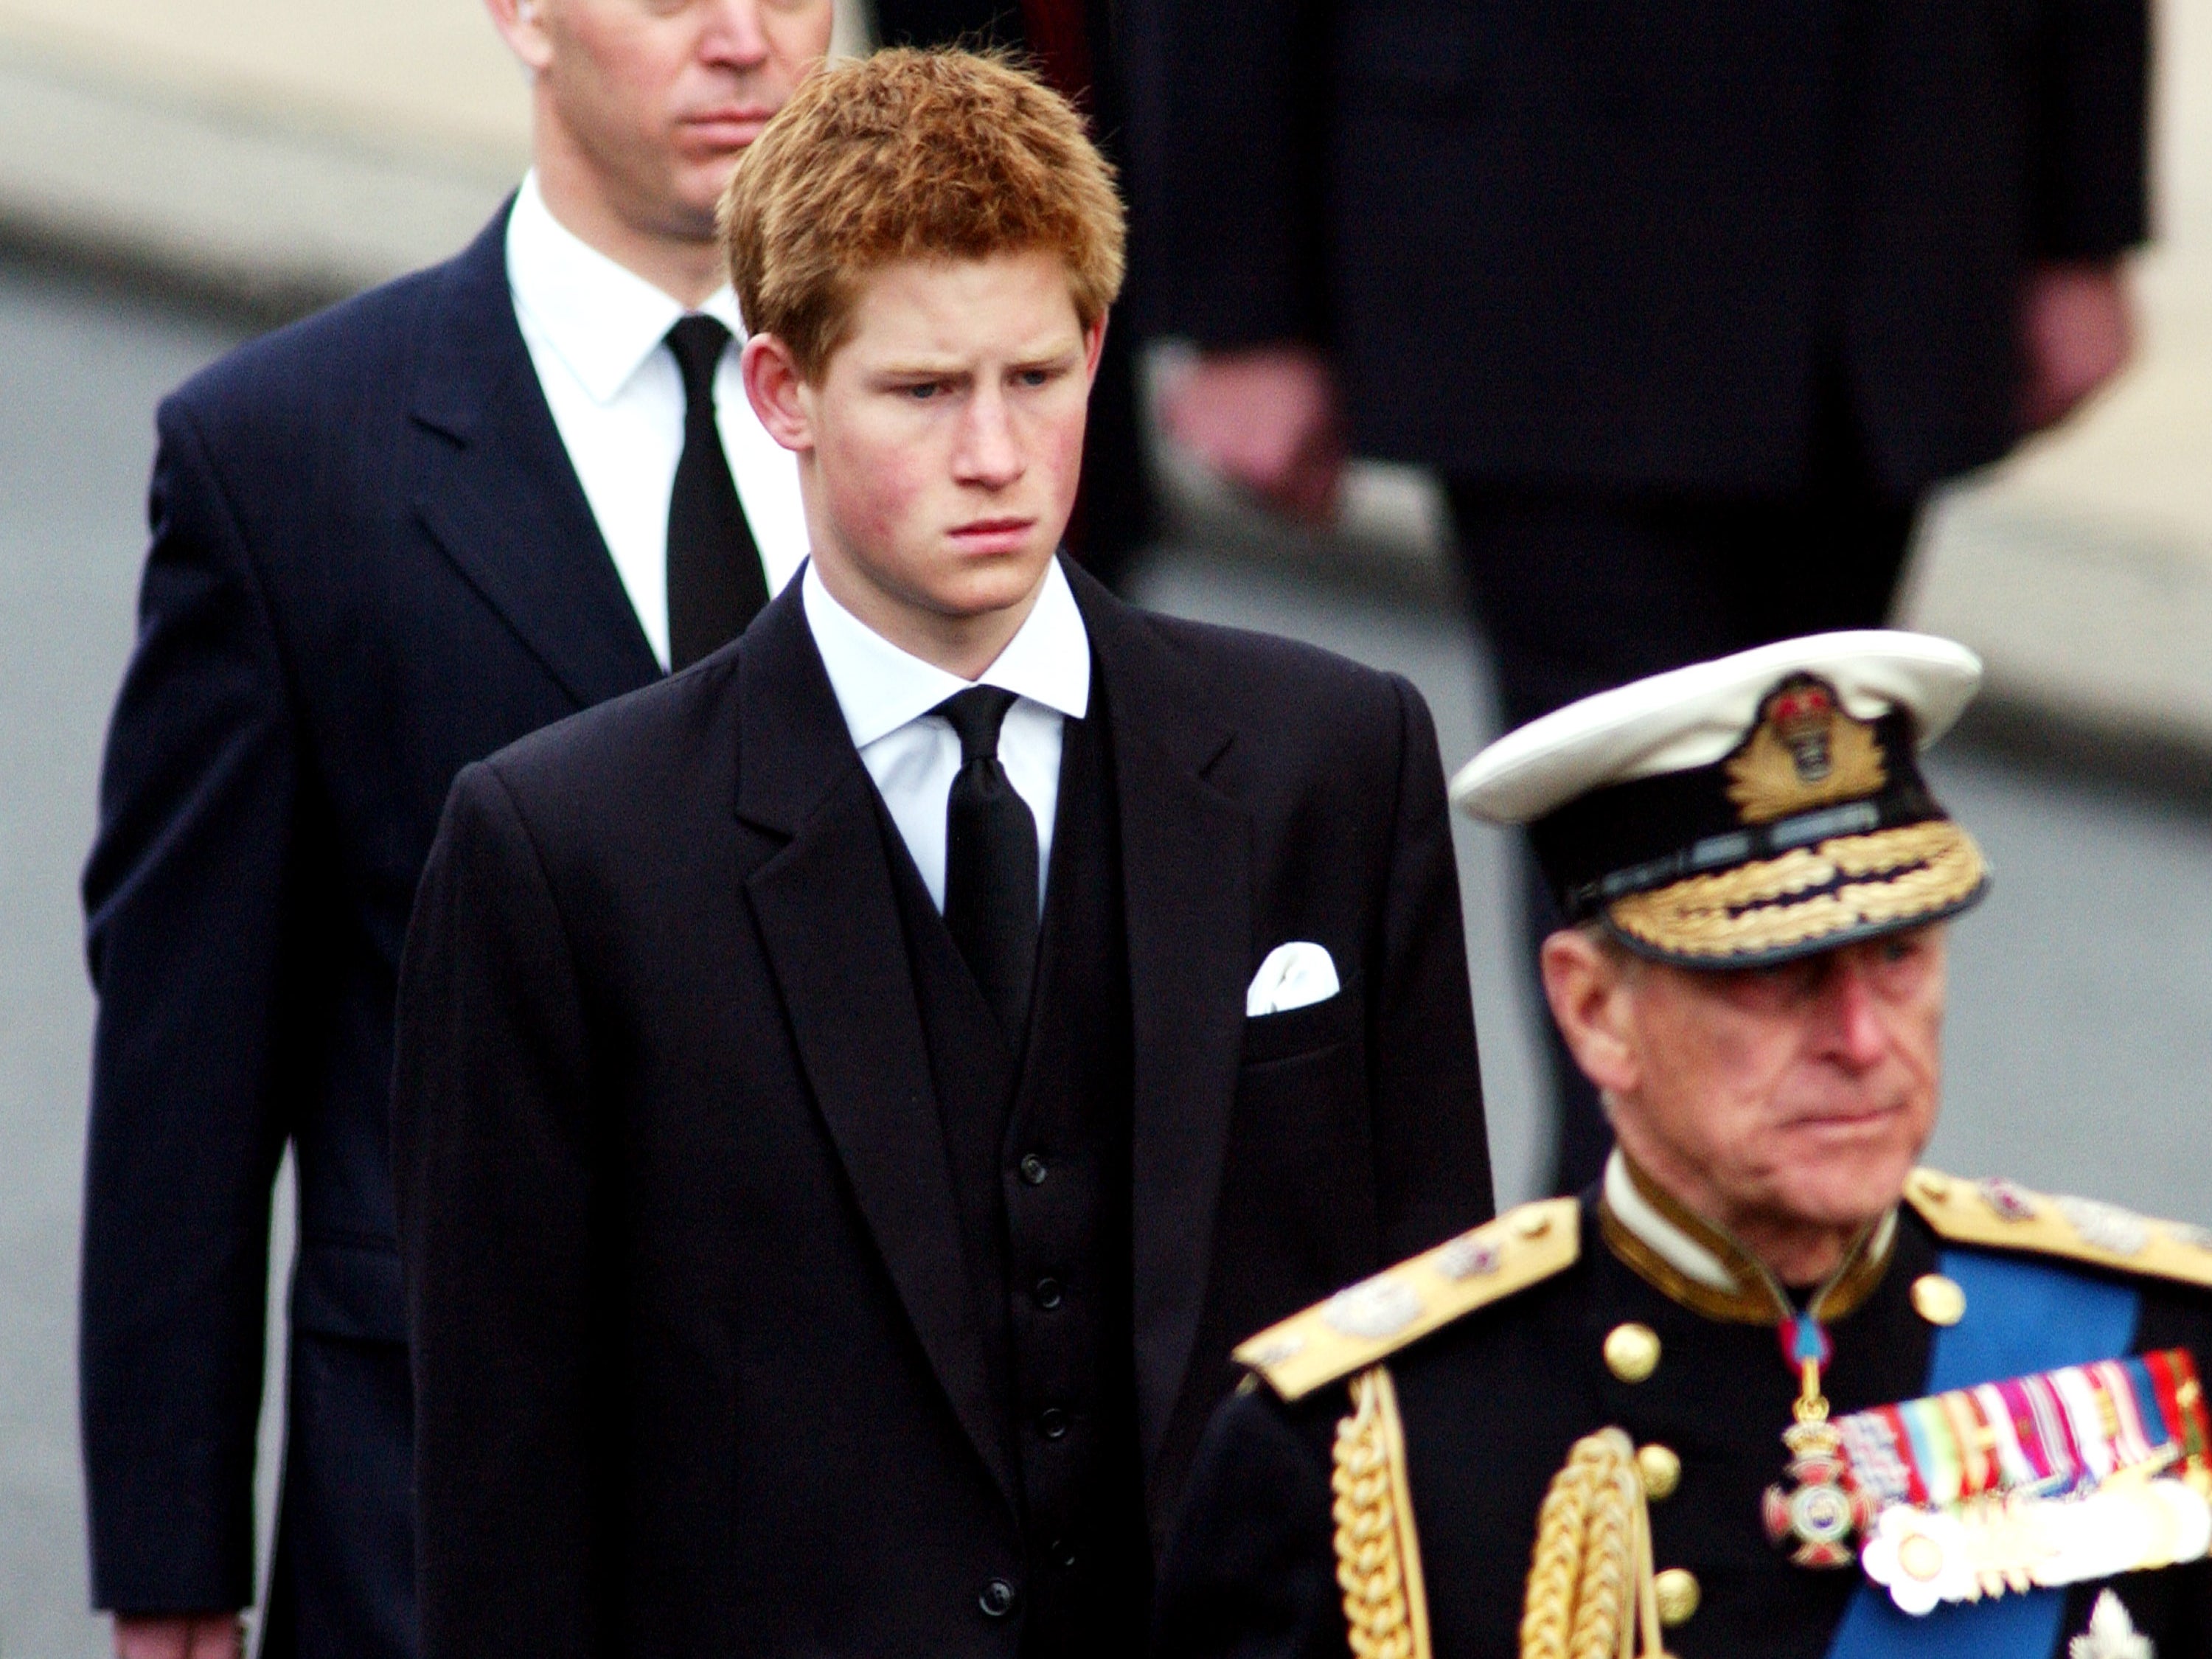 The prince during a funeral procession for the late Queen Mother in 2002